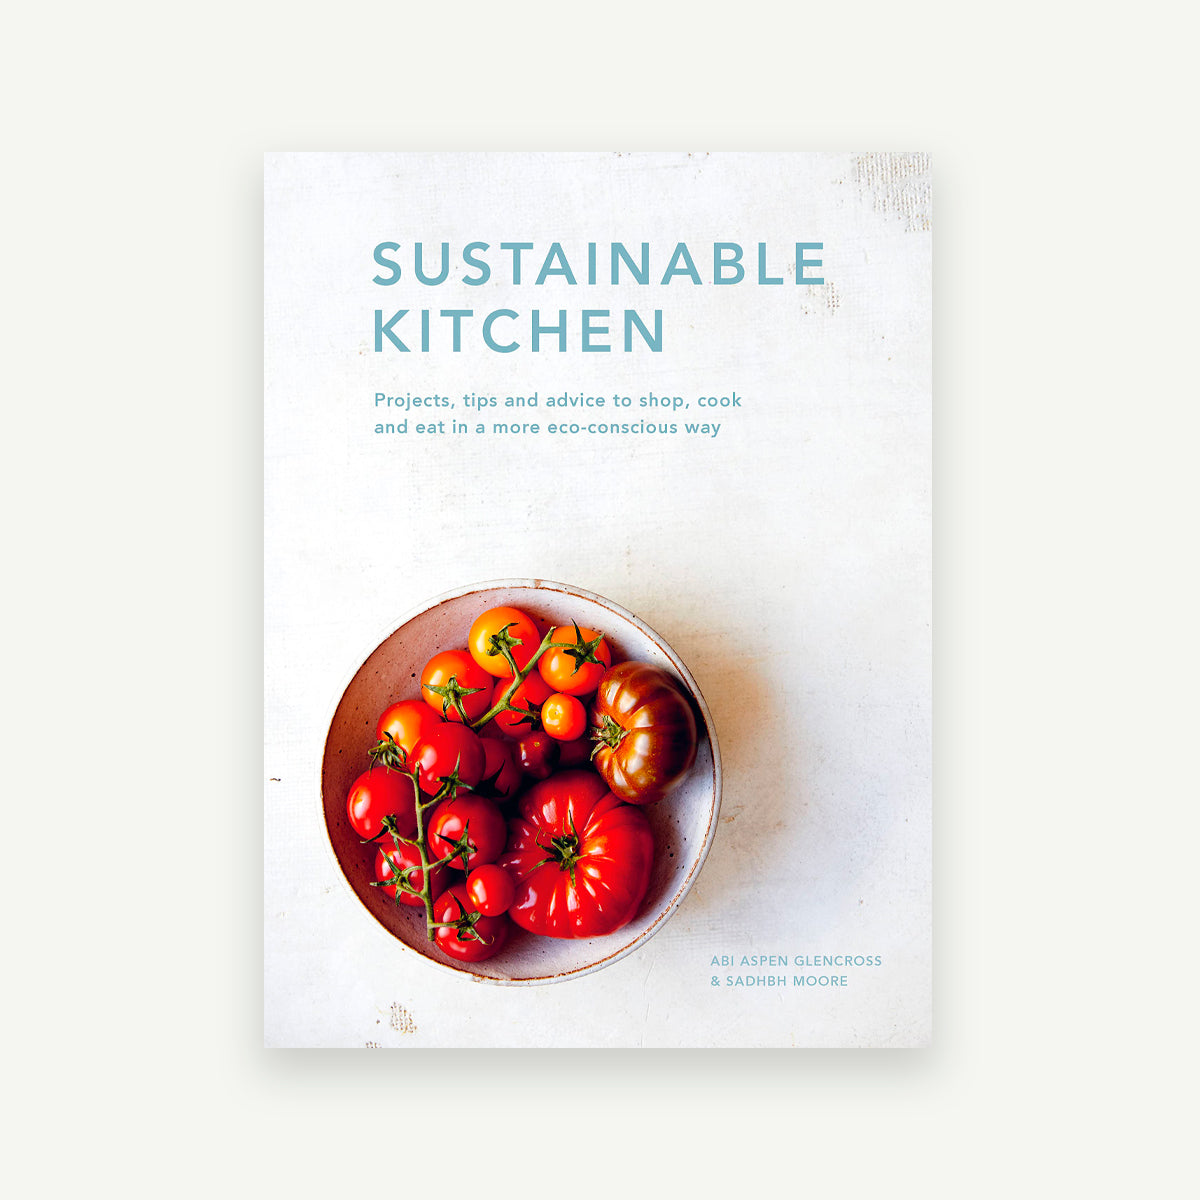 Sustainable Kitchen: Projects, Tips and Advise to Shop, Cook and Eat in a More Eco-Concious Way